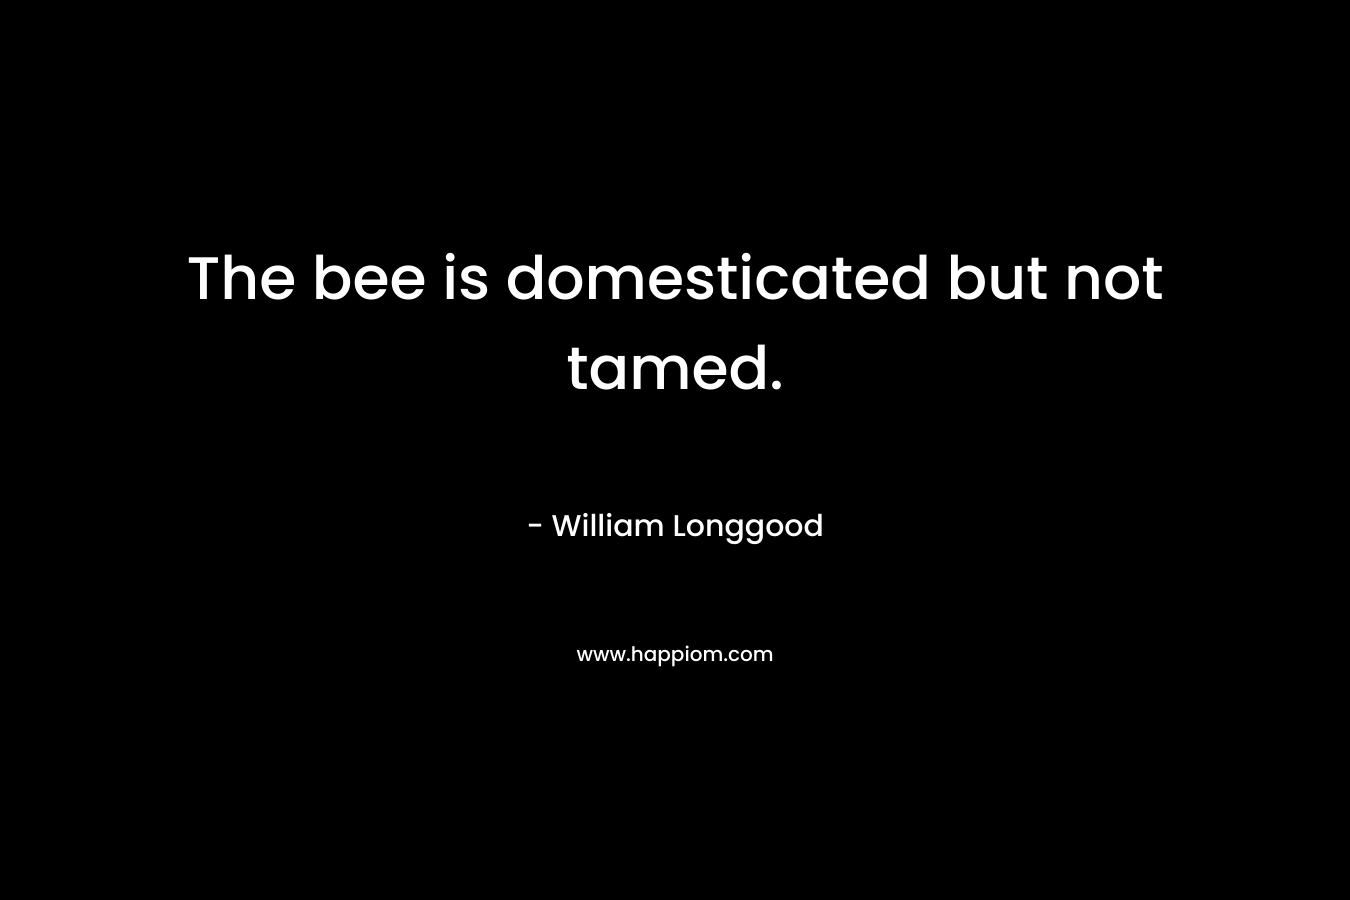 The bee is domesticated but not tamed. – William Longgood